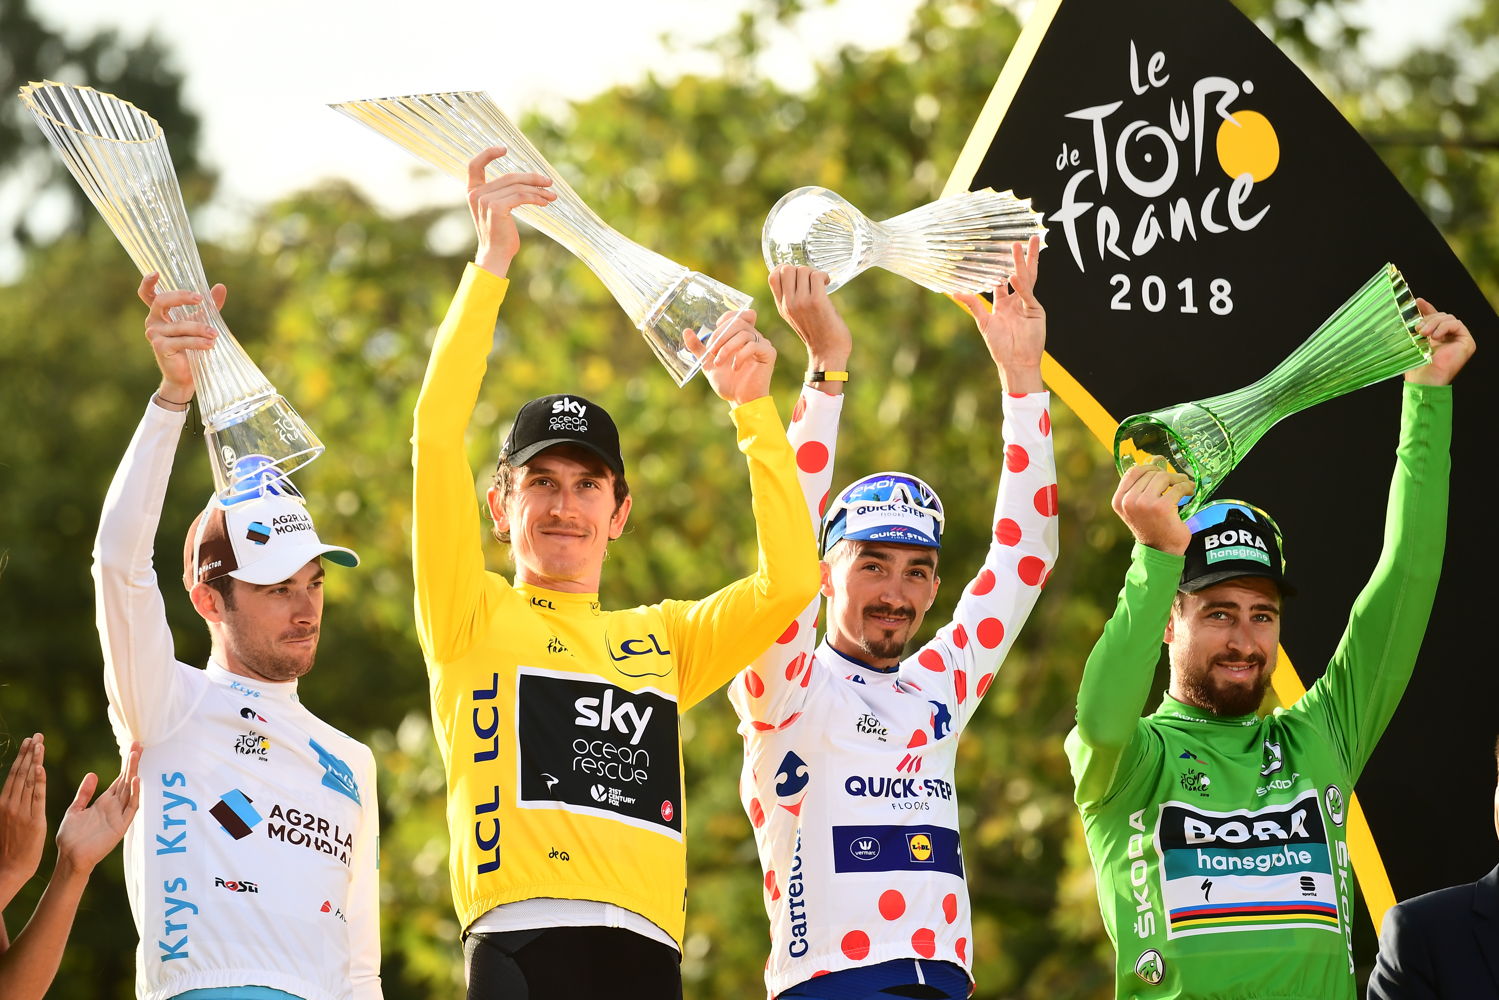 With 21 stages and a total of 3,351 km behind him,
Geraint Thomas (in the yellow jersey) celebrated as the
overall winner of arguably the toughest cycling race in the
world. From the left Pierre Latour, Geraint Thomas, Julian
Alaphilippe and Peter Sagan.